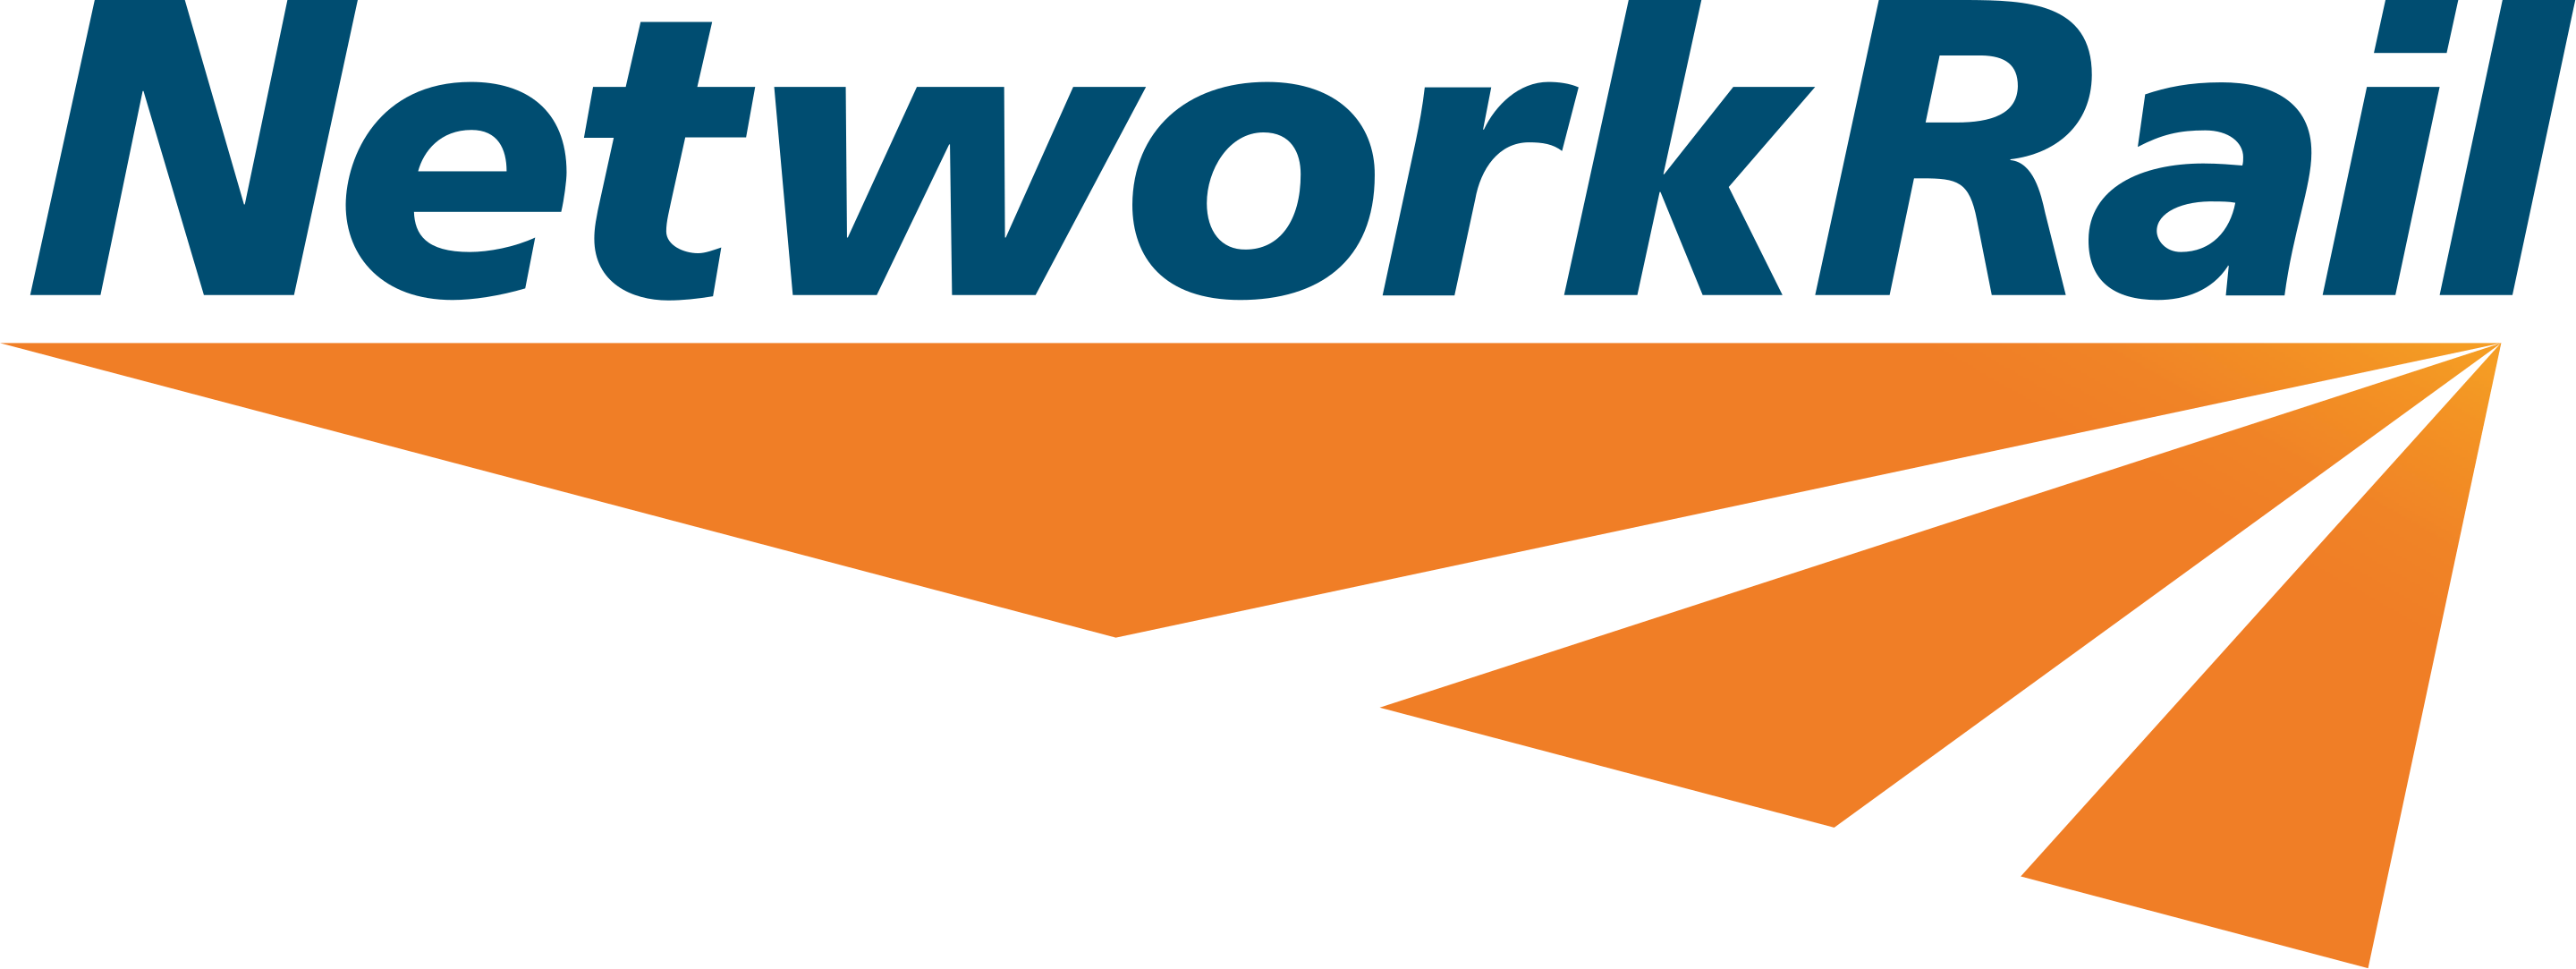 Ref normed network rail